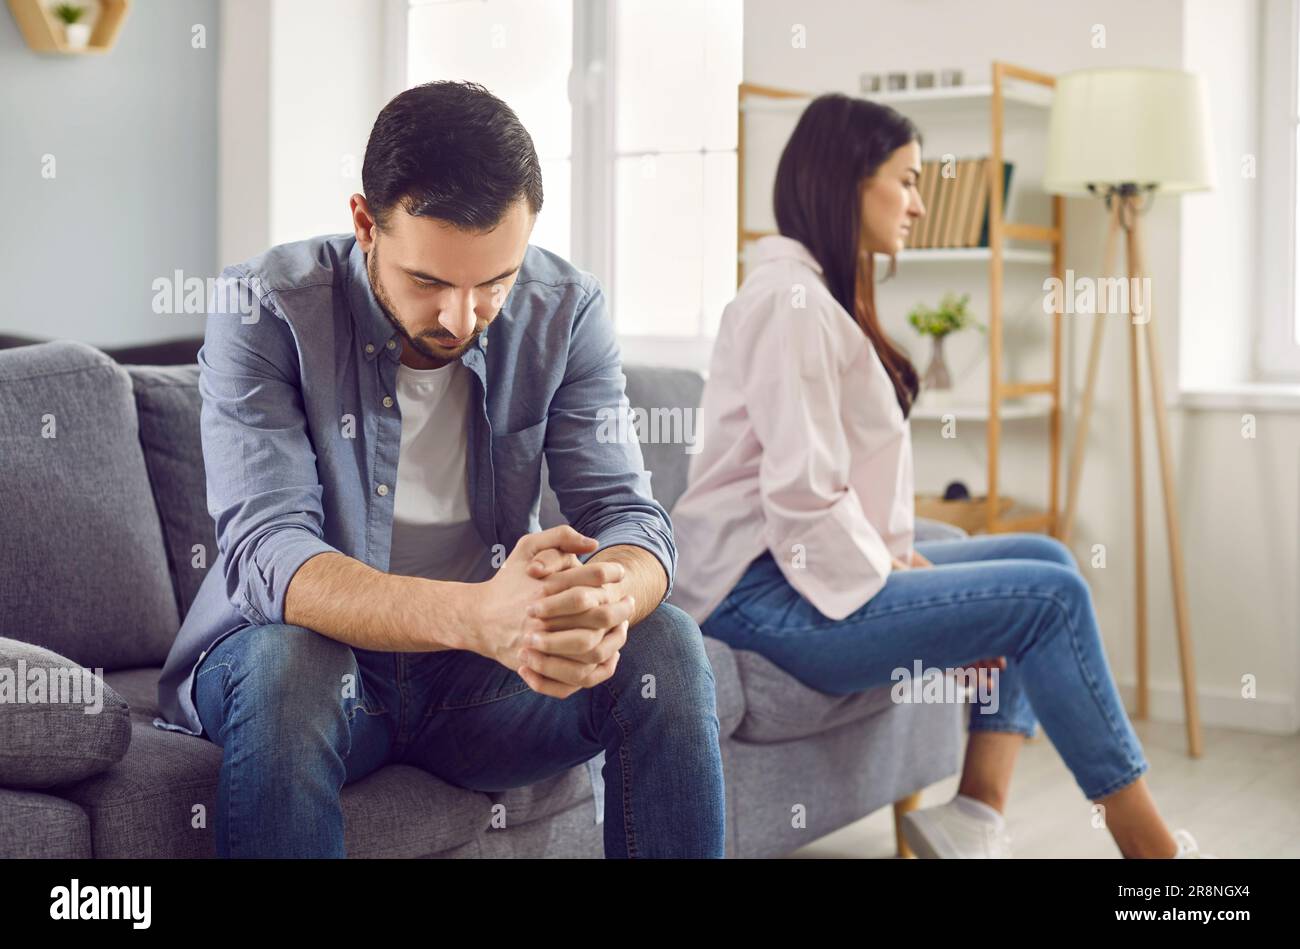 Upset young man sitting on sofa and a woman in background at home. Quarrel and divorce concept. Stock Photo